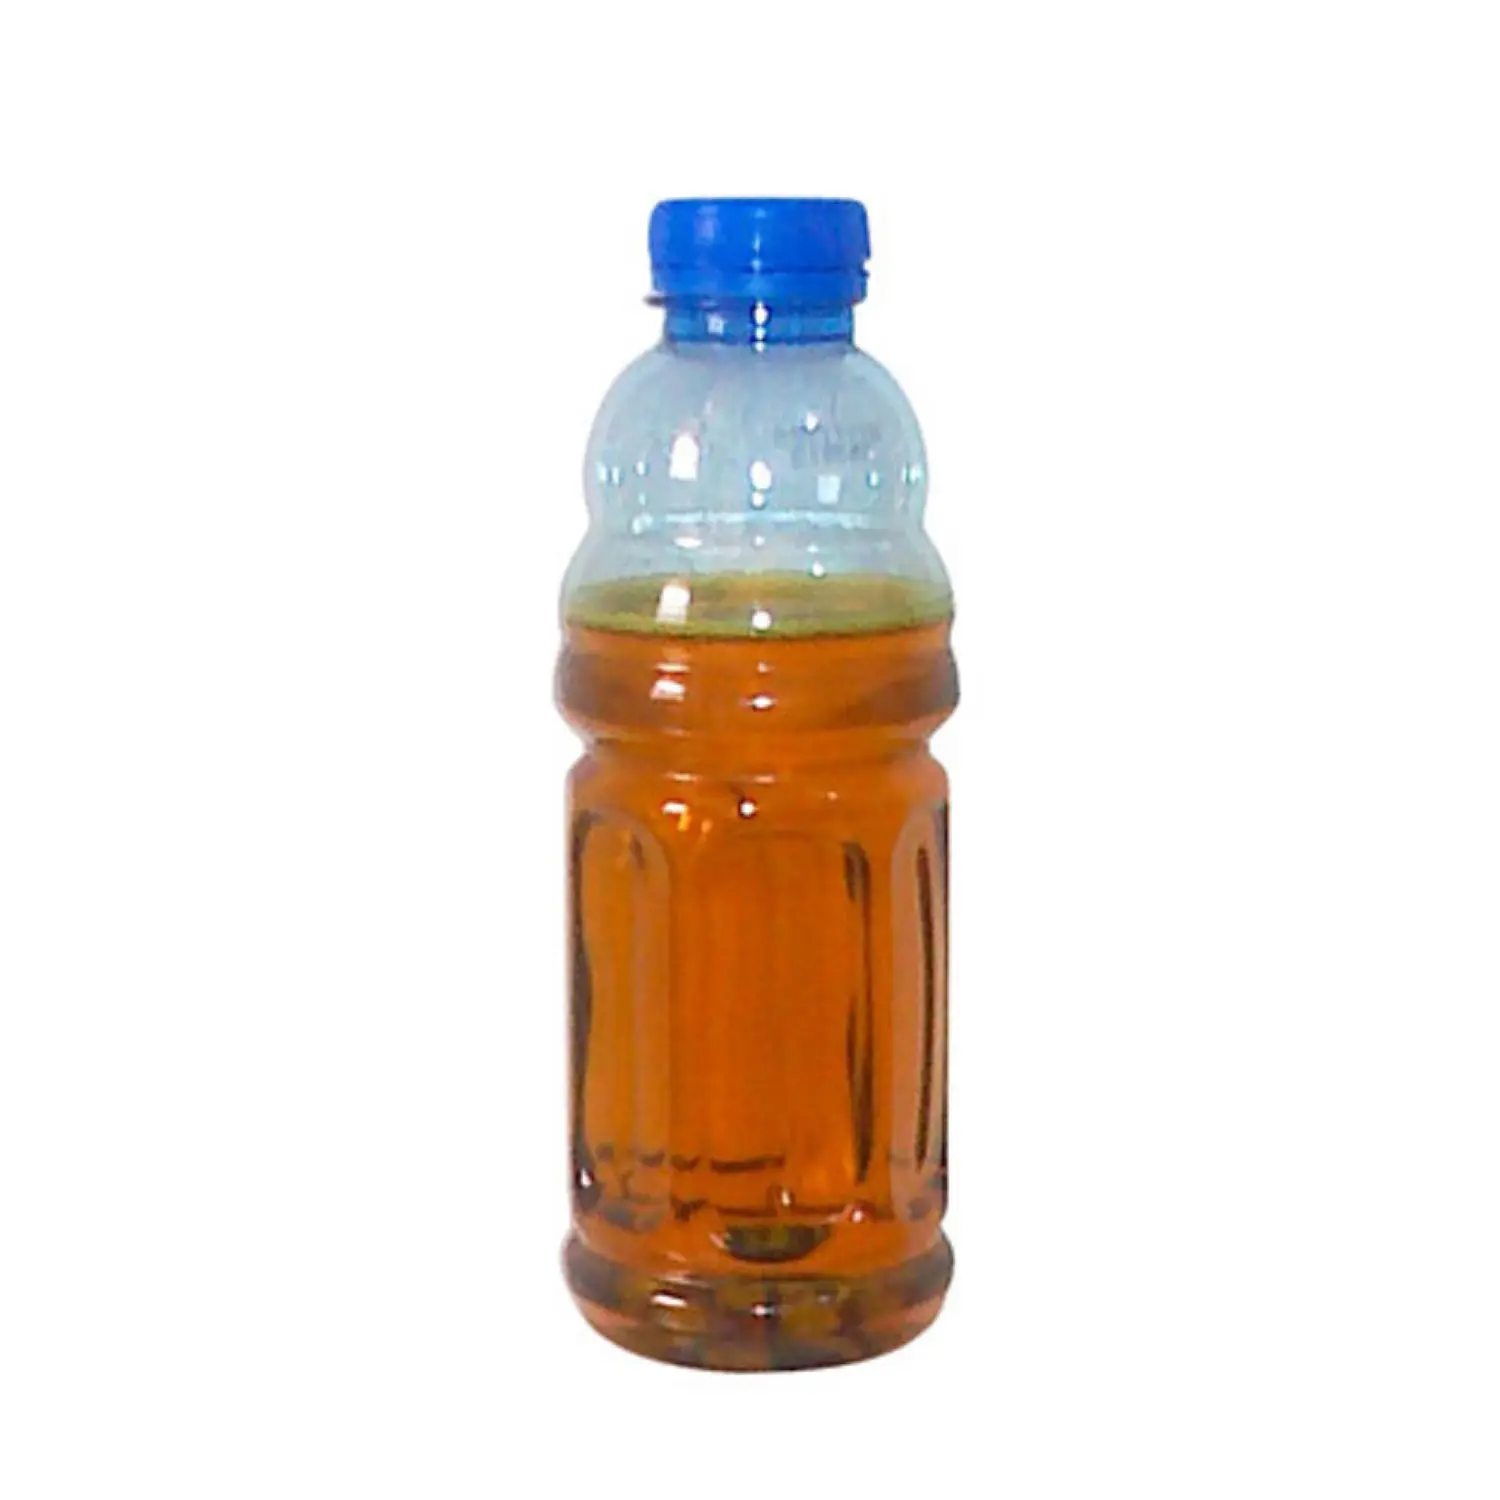 USED COOKING OIL EXPORTER, UCO, UVO, WVO, WCO, Waste oil Supplier BioDiesel